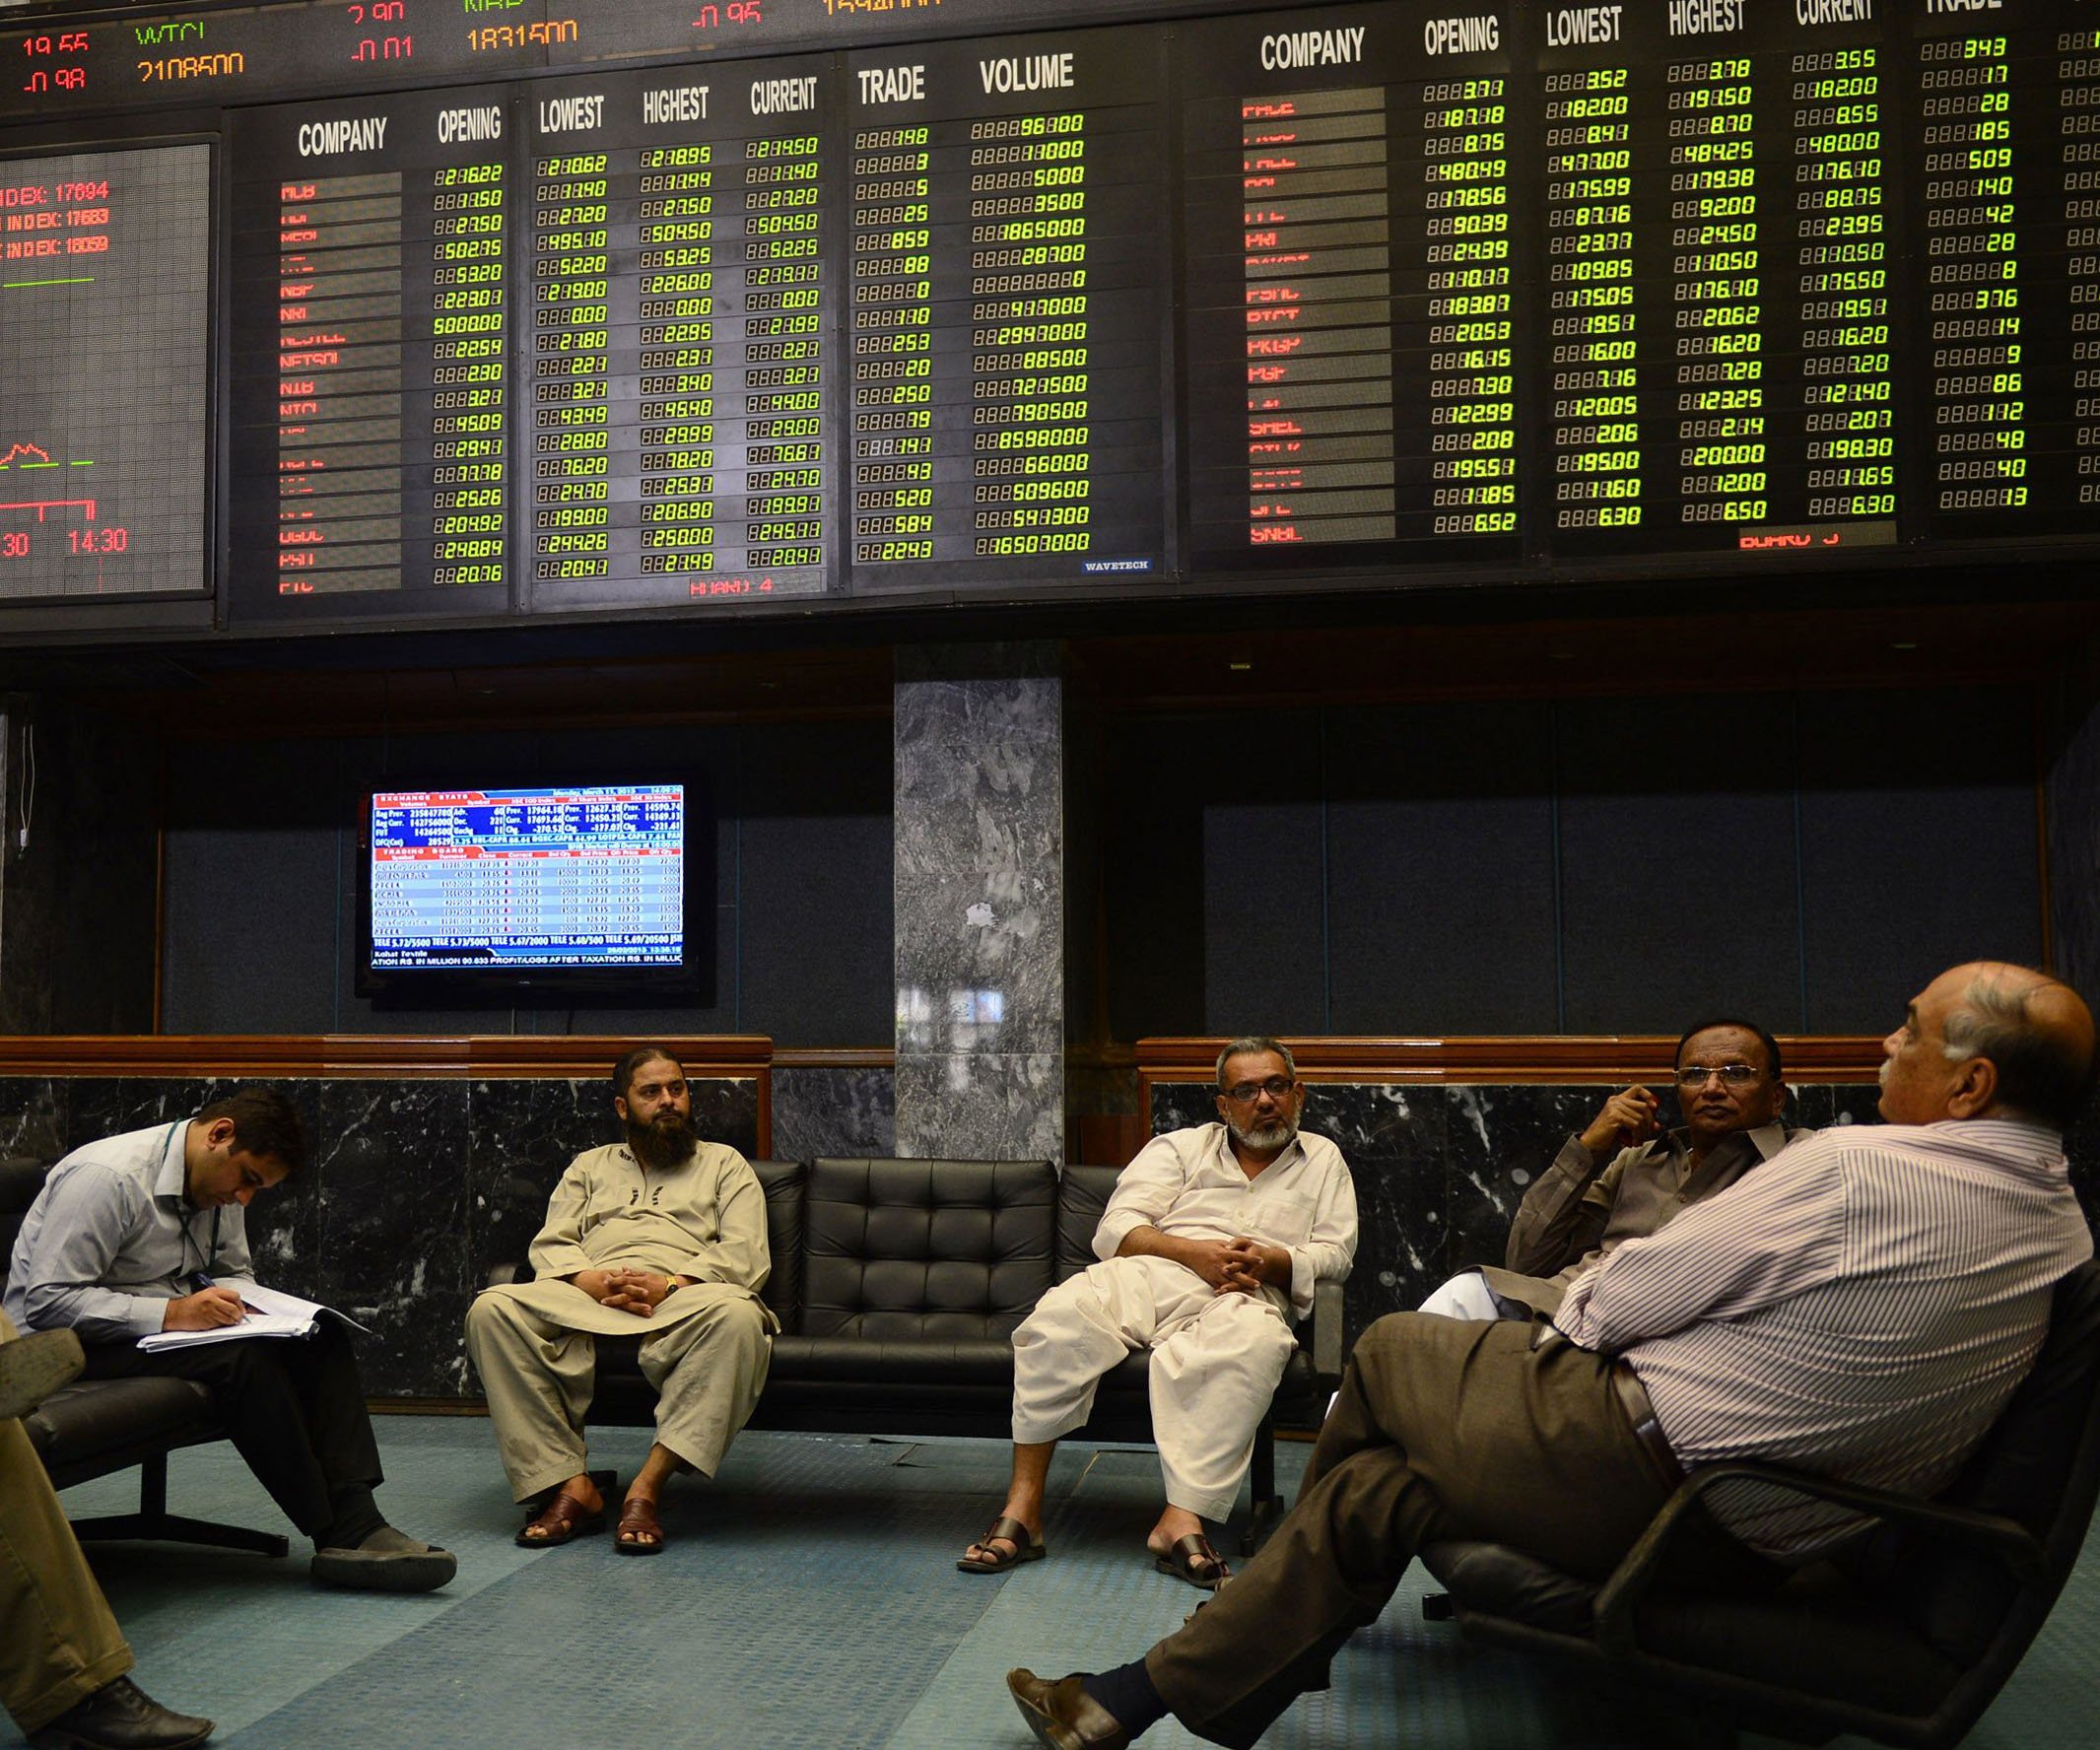 benchmark index declines 158 33 points to close at 42 301 20 photo afp